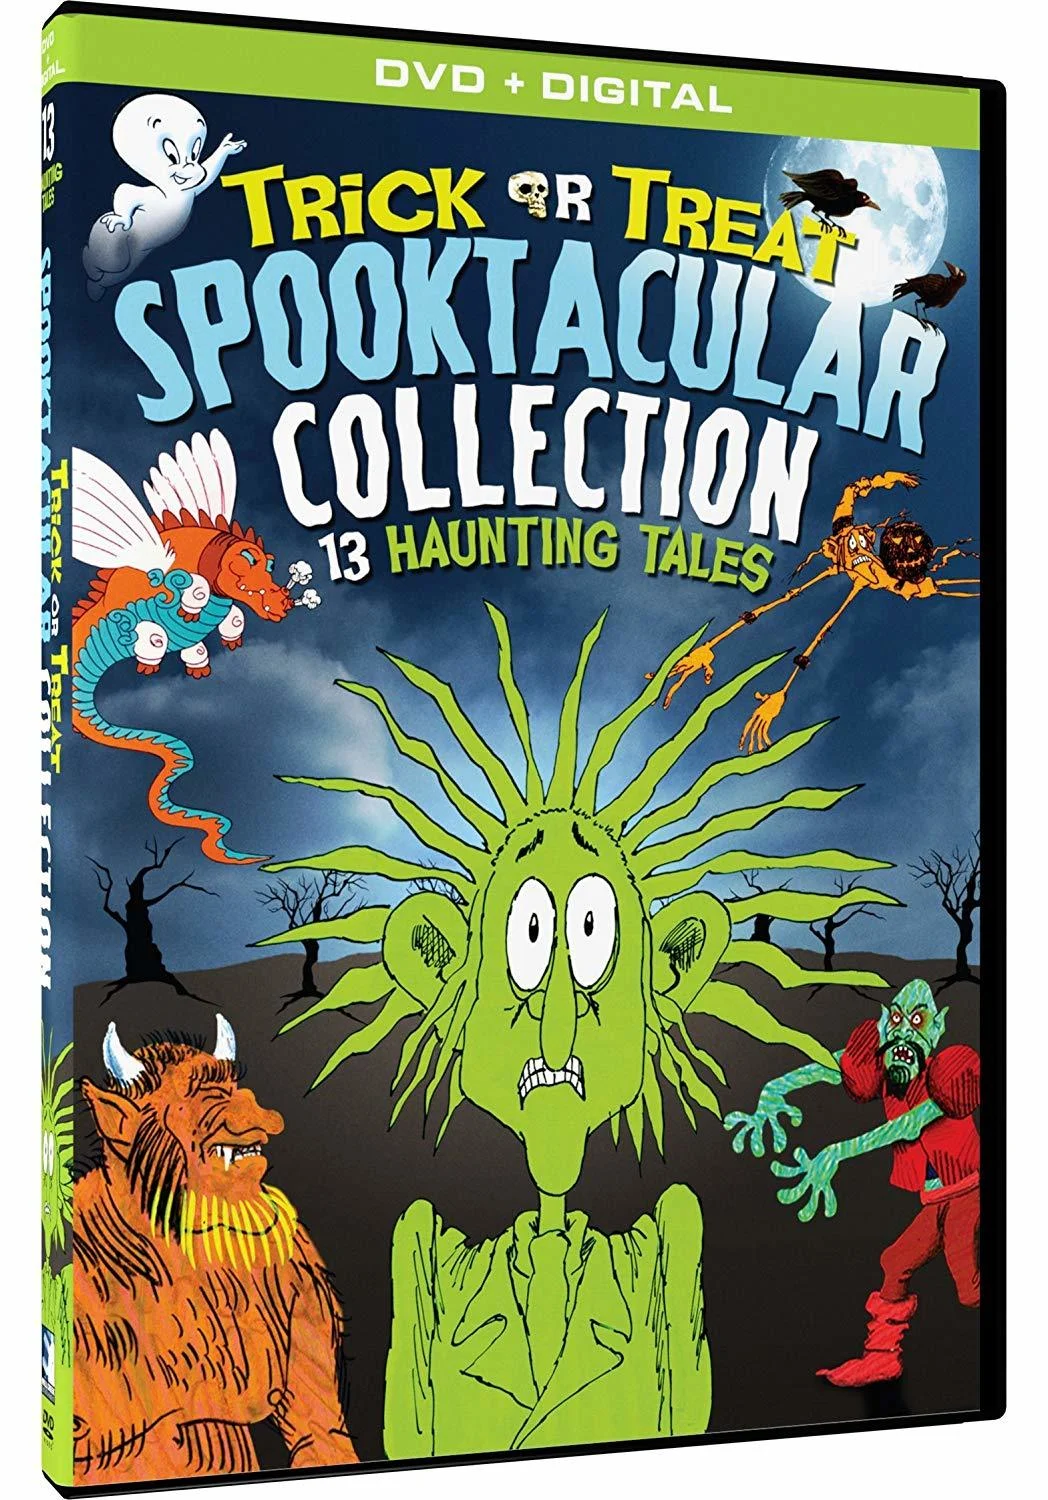 Trick or Treat: Spooktacular Edition (DVD) on MovieShack